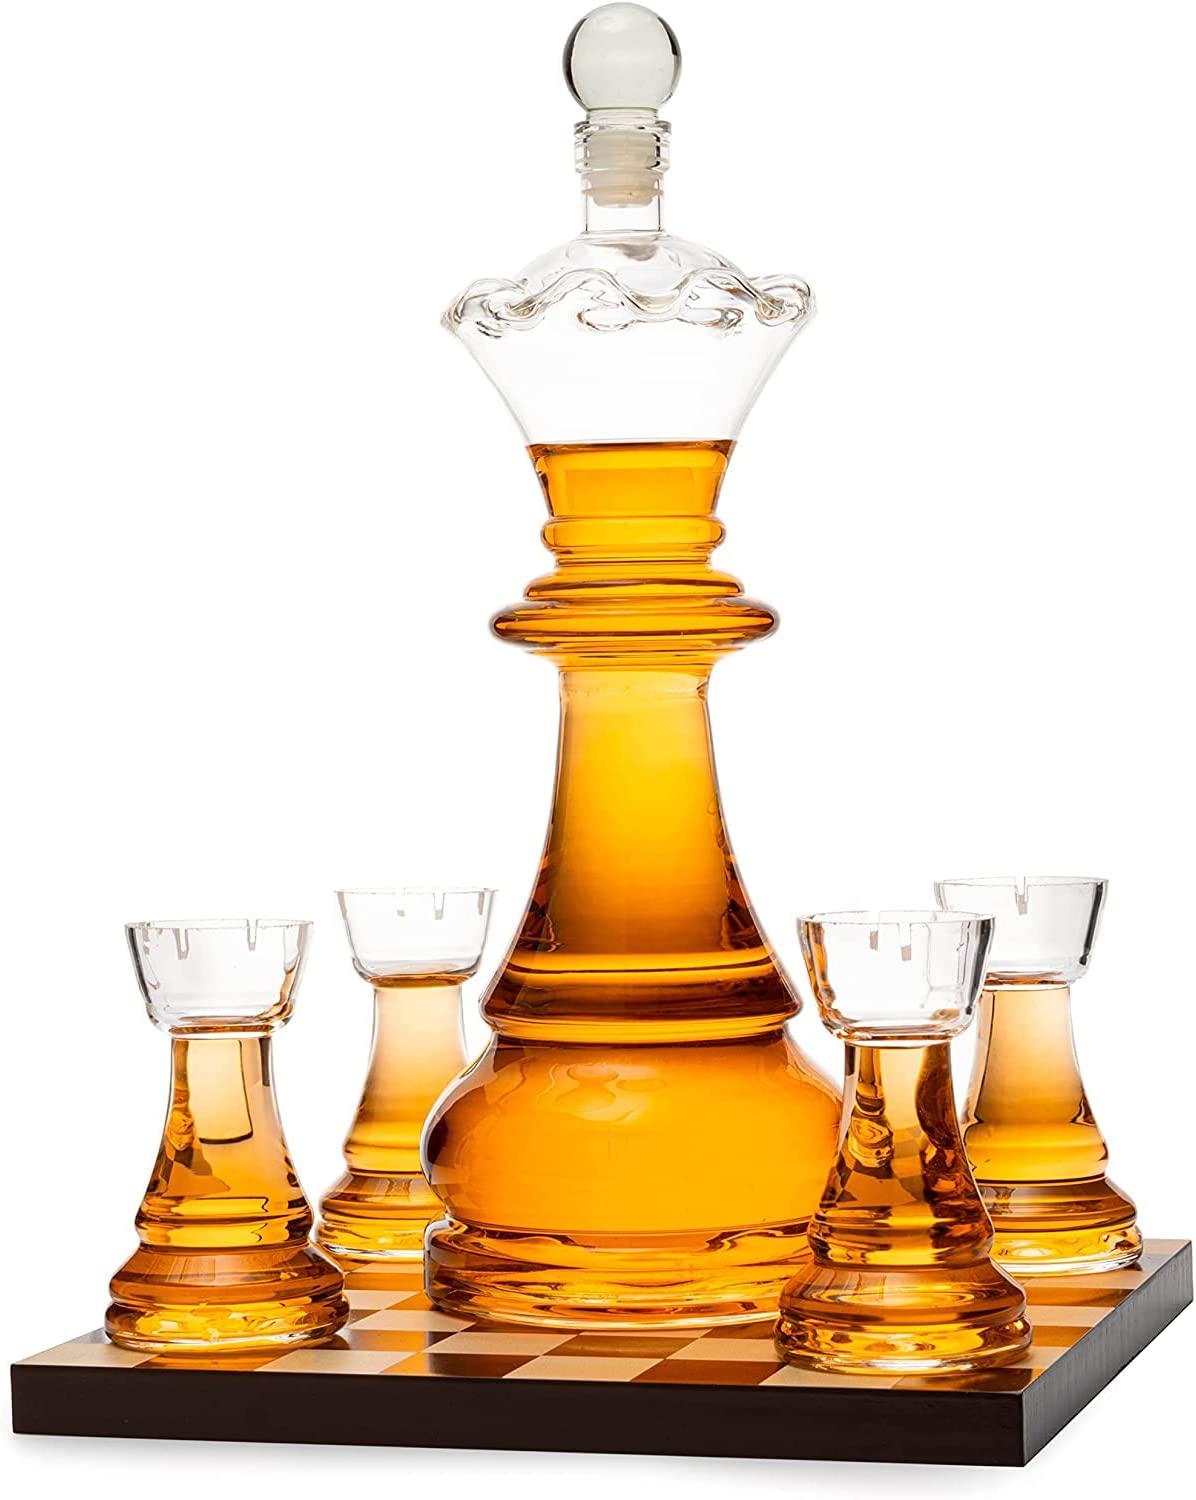 New Chess Decanter Set by The Wine Savant - Queen Chess Decanter 750ml